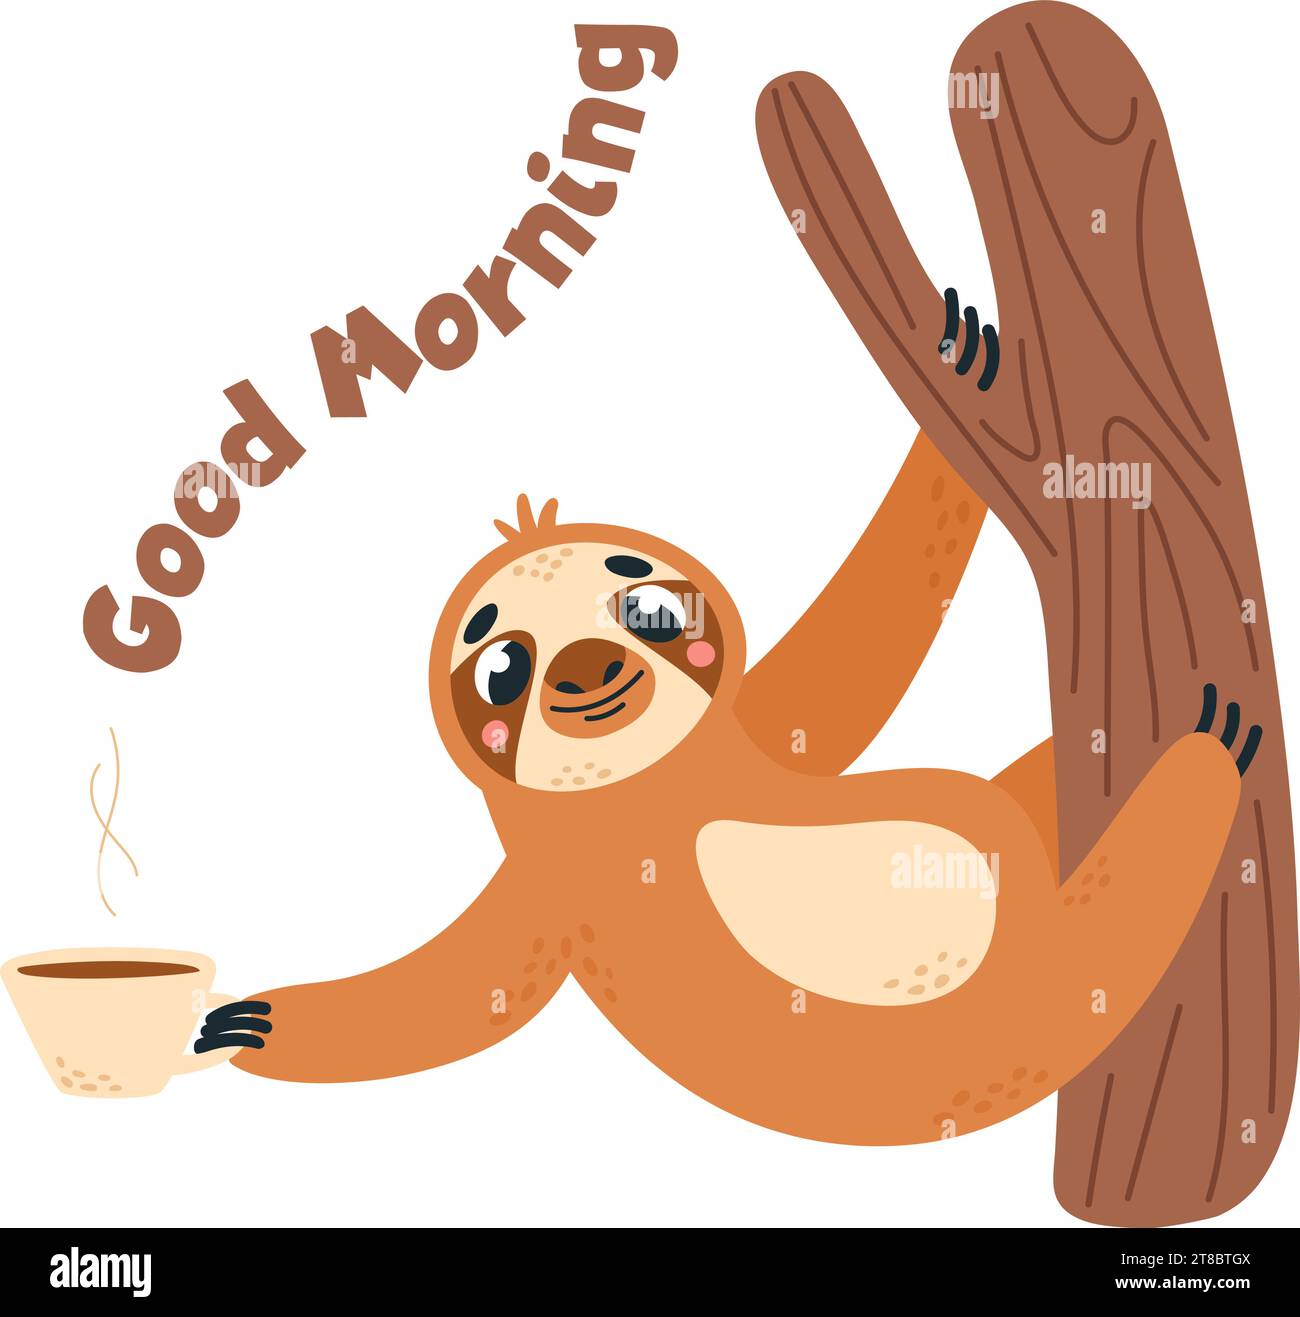 https://c8.alamy.com/comp/2T8BTGX/sloth-and-morning-coffee-funny-sloth-bear-hanging-on-tree-branch-and-hold-cup-lazy-asleep-animal-problems-waking-up-metaphor-classy-vector-2T8BTGX.jpg